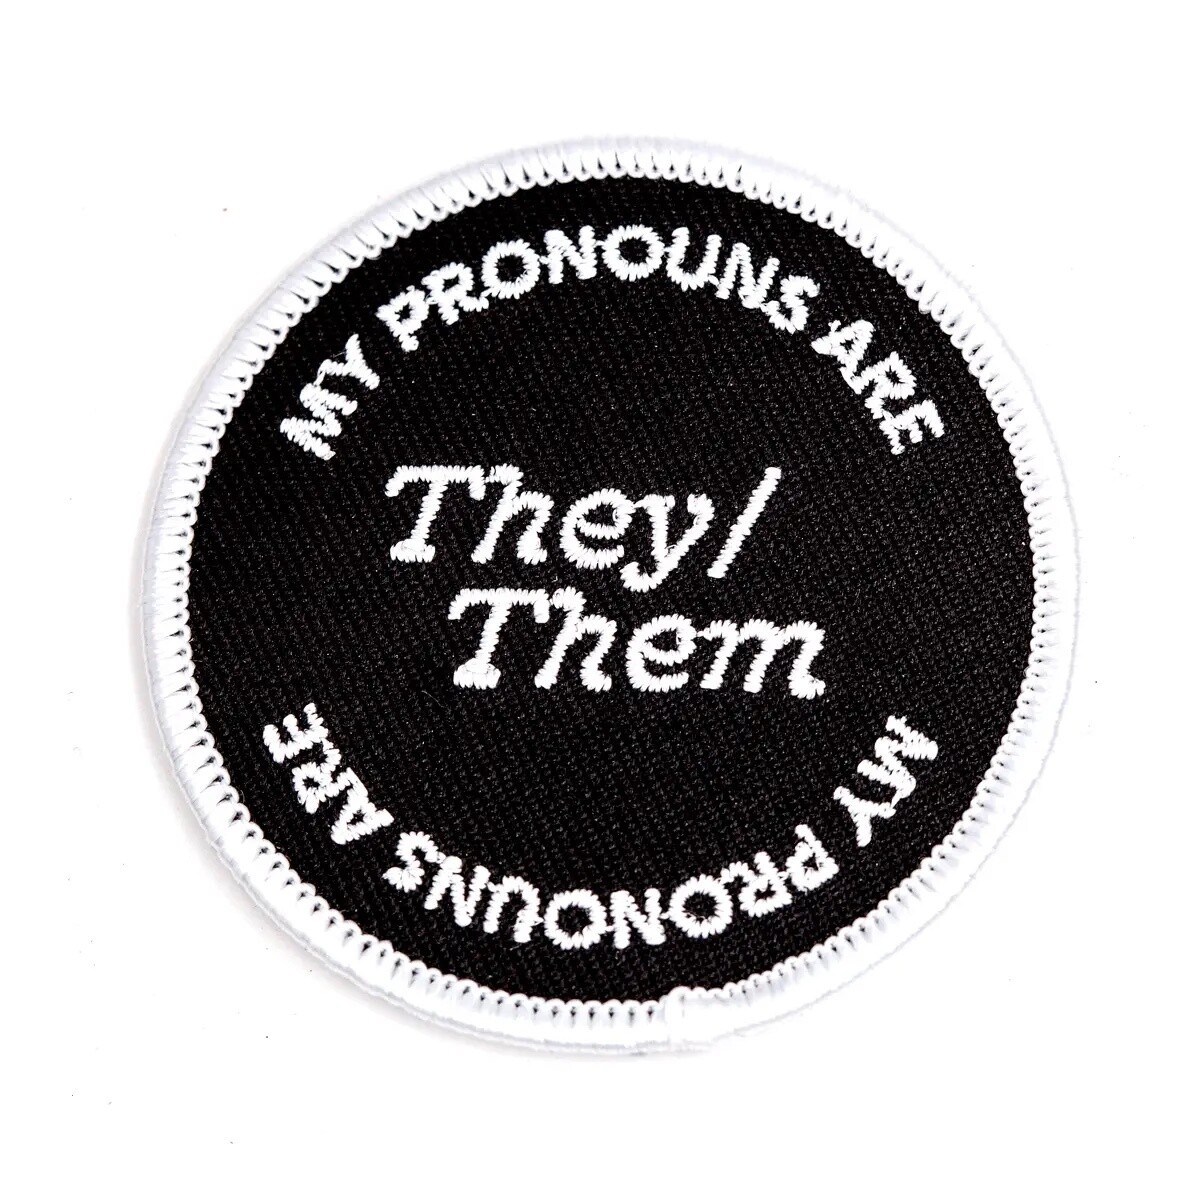 THEY/THEM - Embroidered Patch by These Are Things